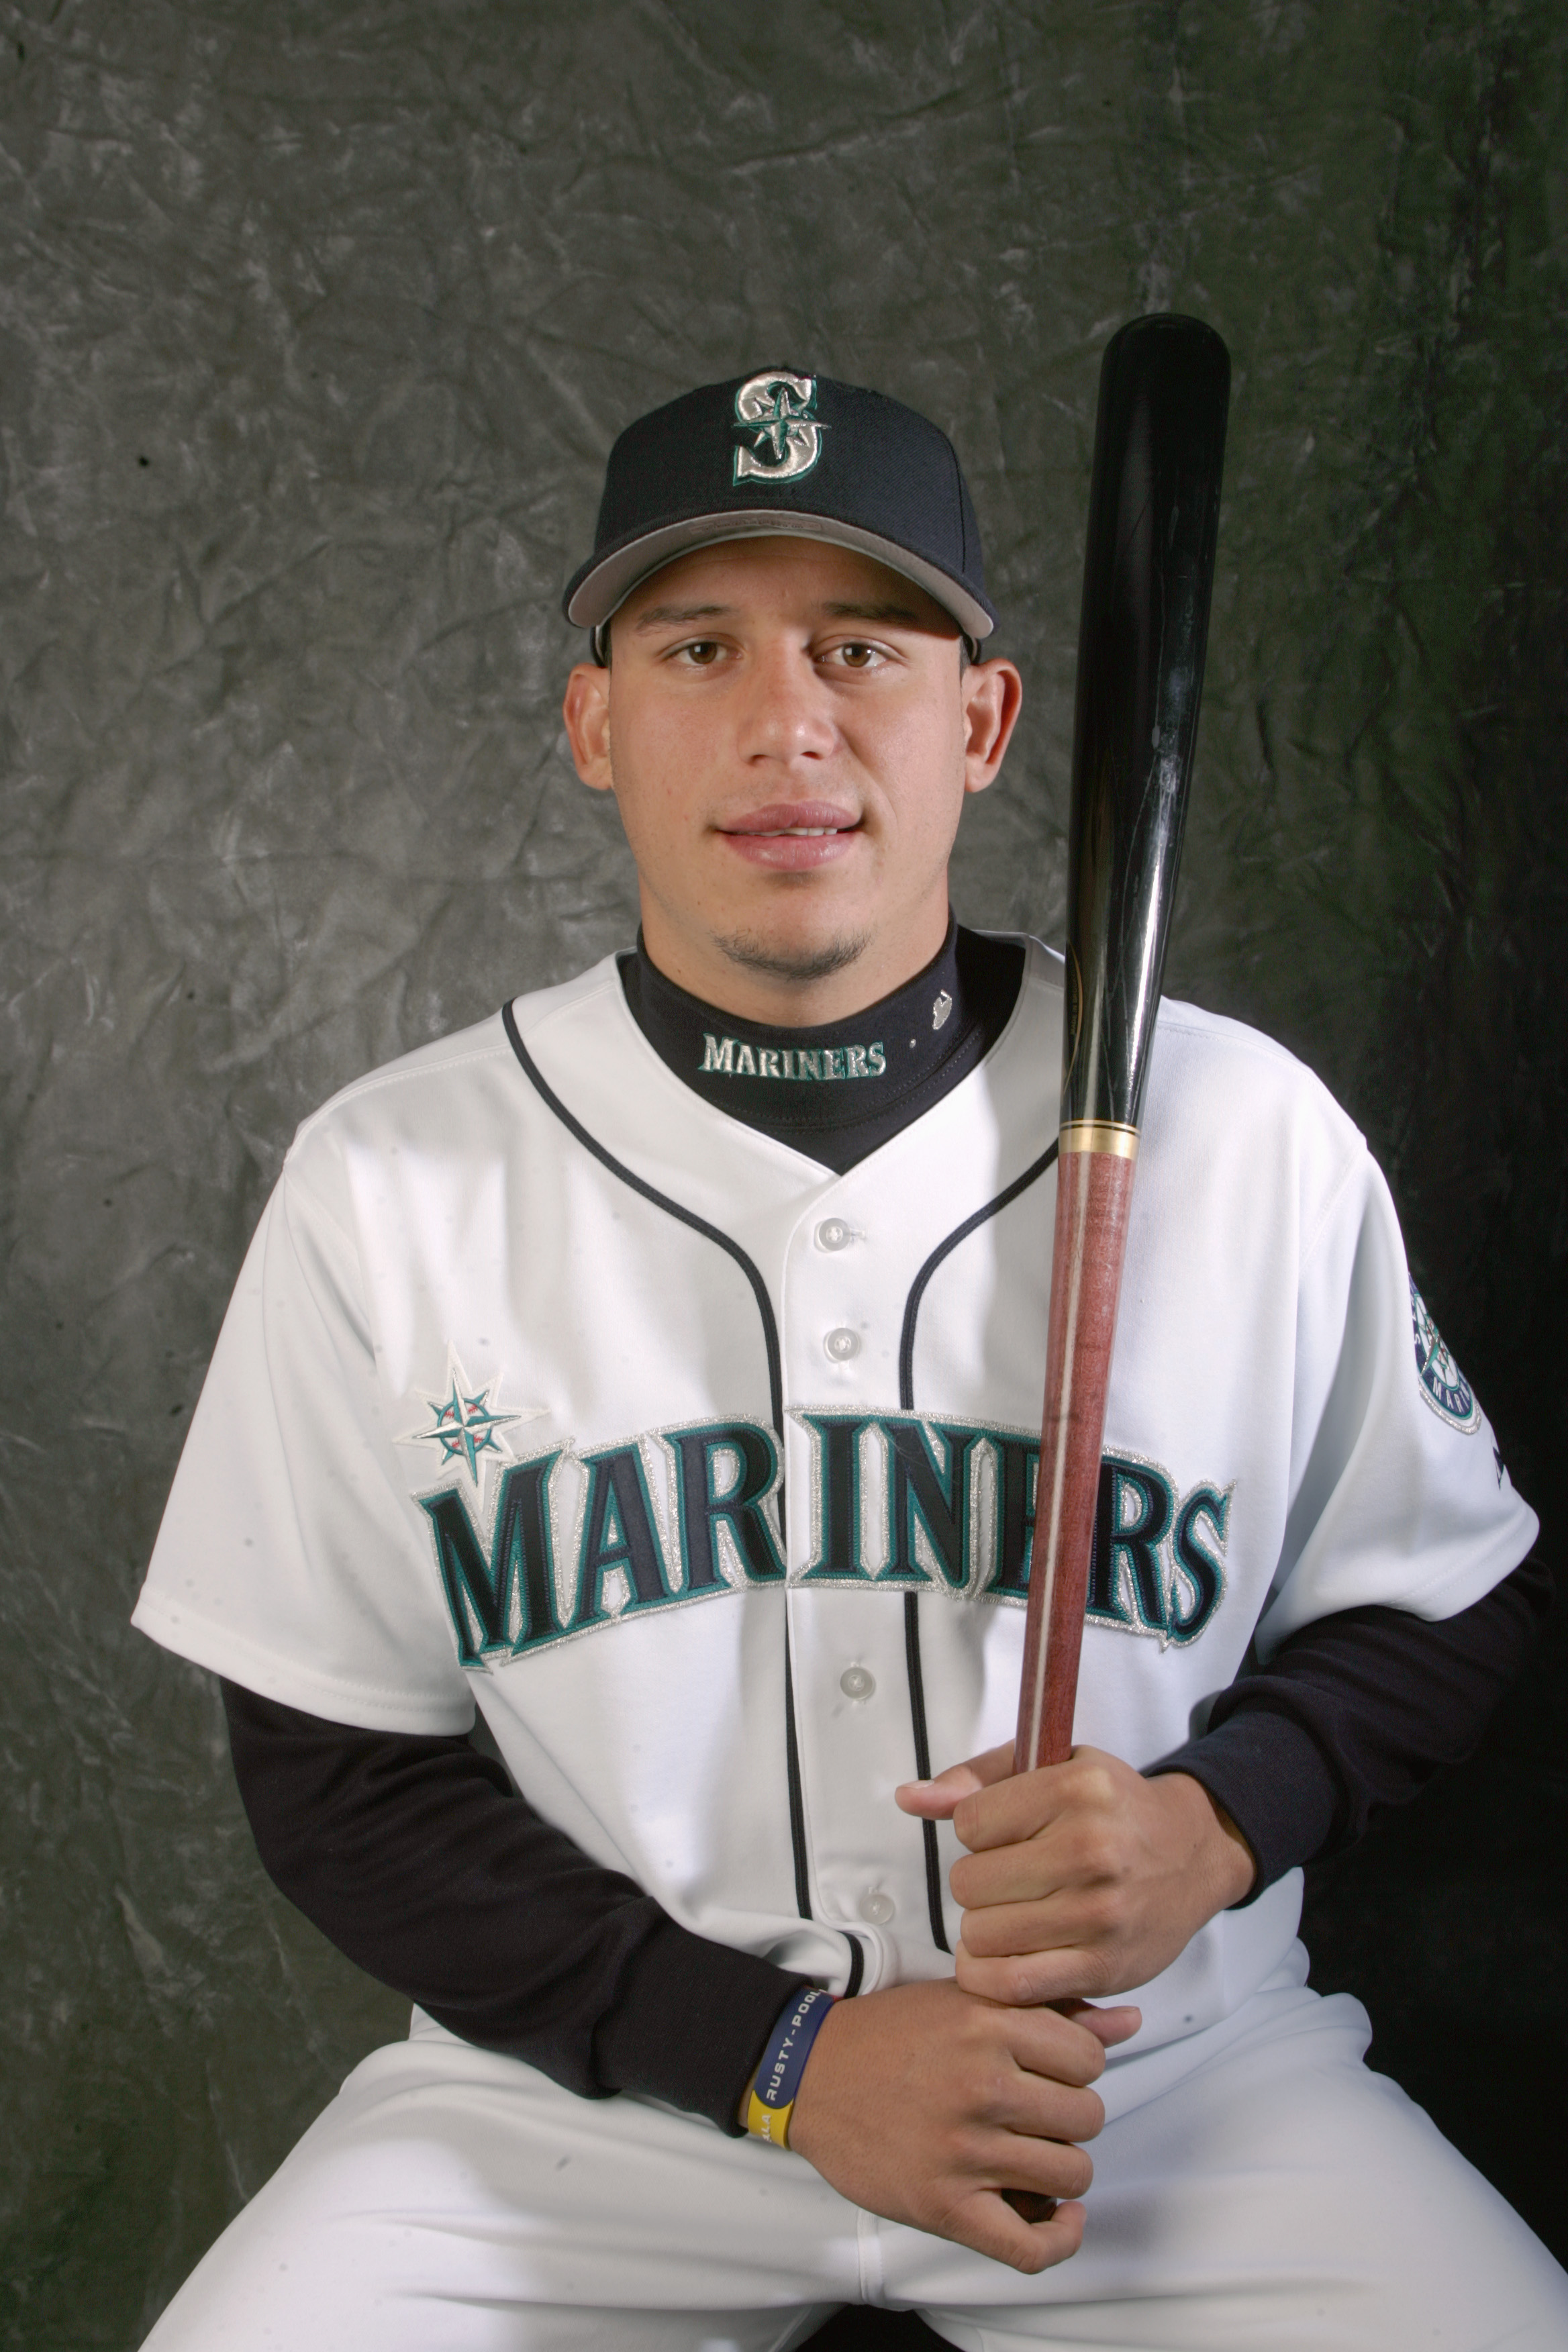 PEORIA, AZ - FEBRUARY 22:  Asdrubal Cabrera poses for a portrait during Seattle Mariniers Photo Day on February 22, 2006 at the Peoria Sports Complex in Peoria, Arizona.  (Photo by Stephen Dunn/Getty Images)